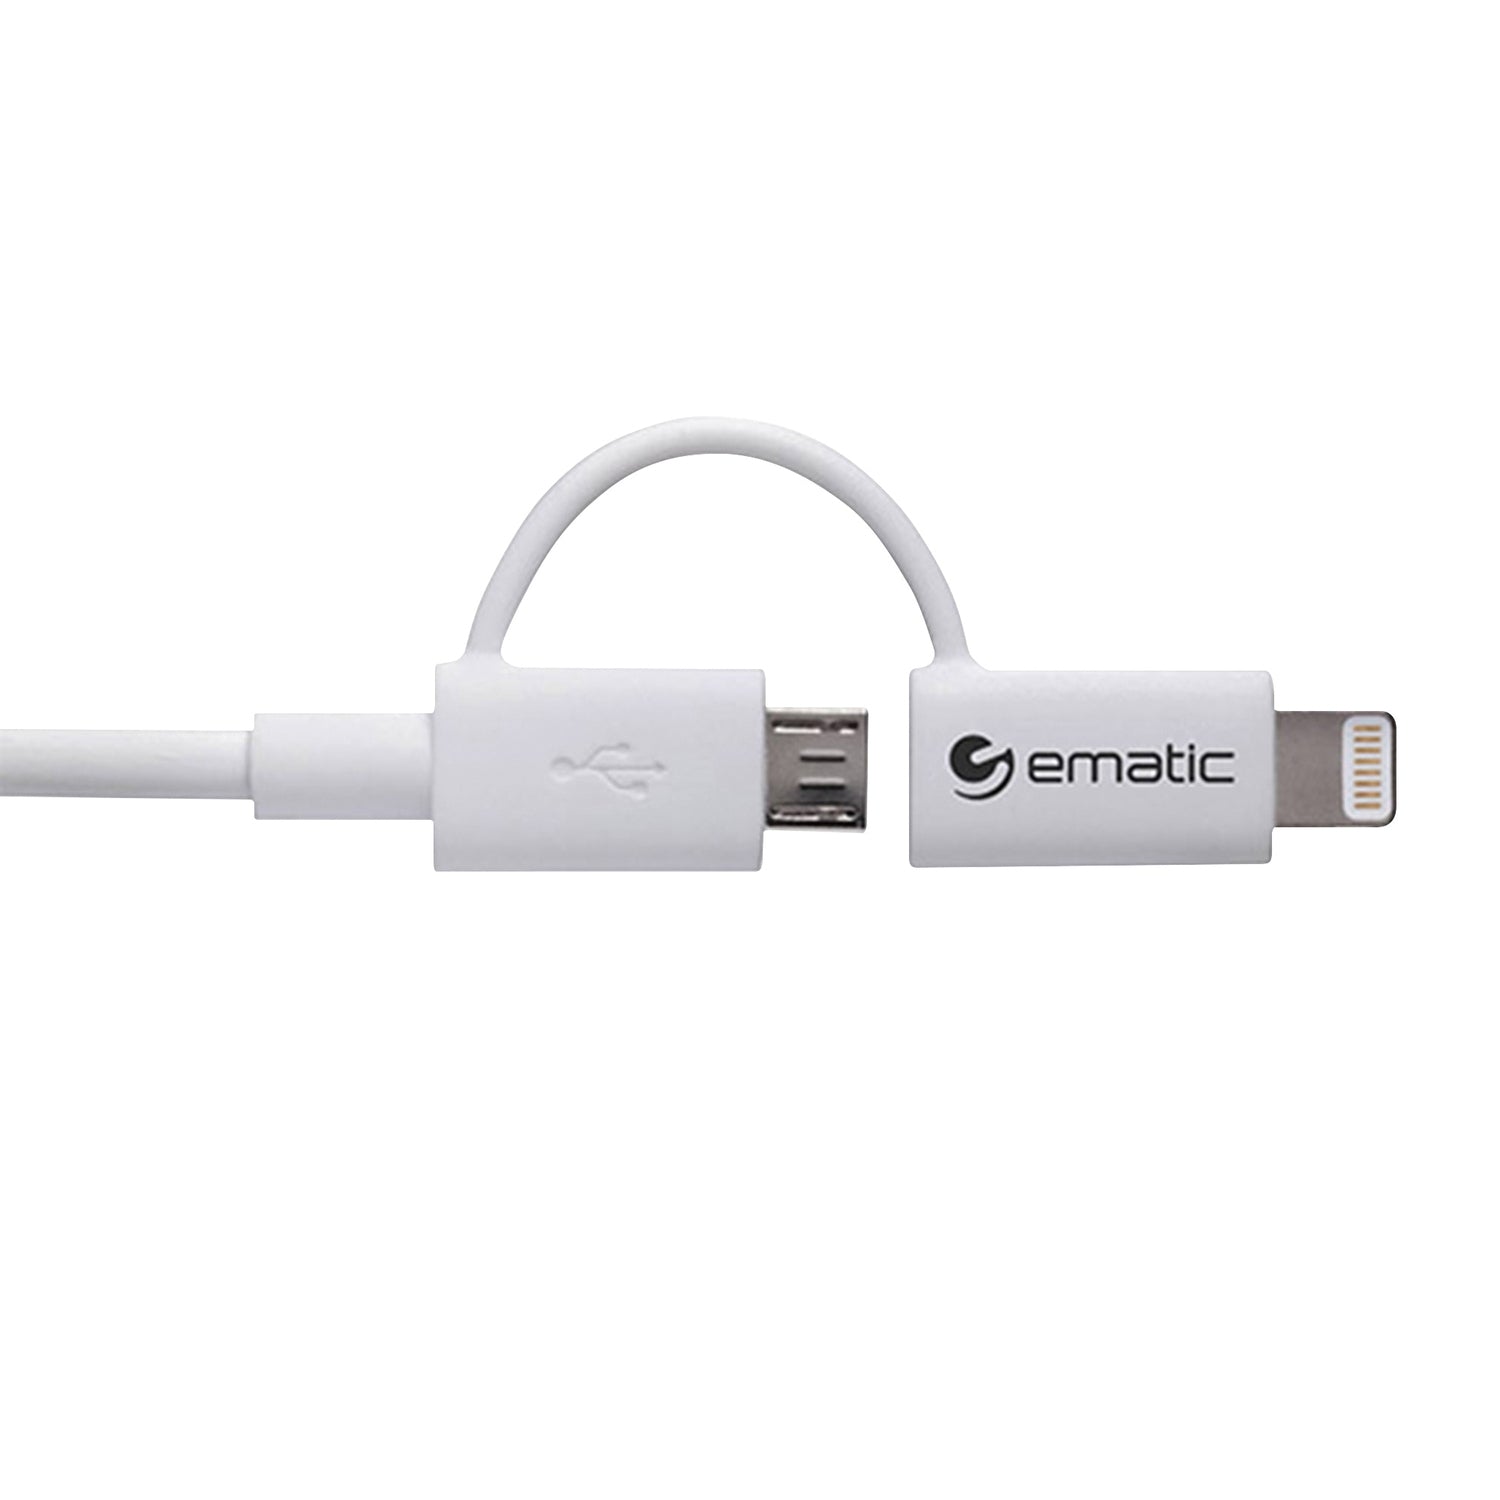 Ematic ELD320 Charge and Sync 2-in-1 Lightning and Micro USB to USB-A Cable, 3 Feet